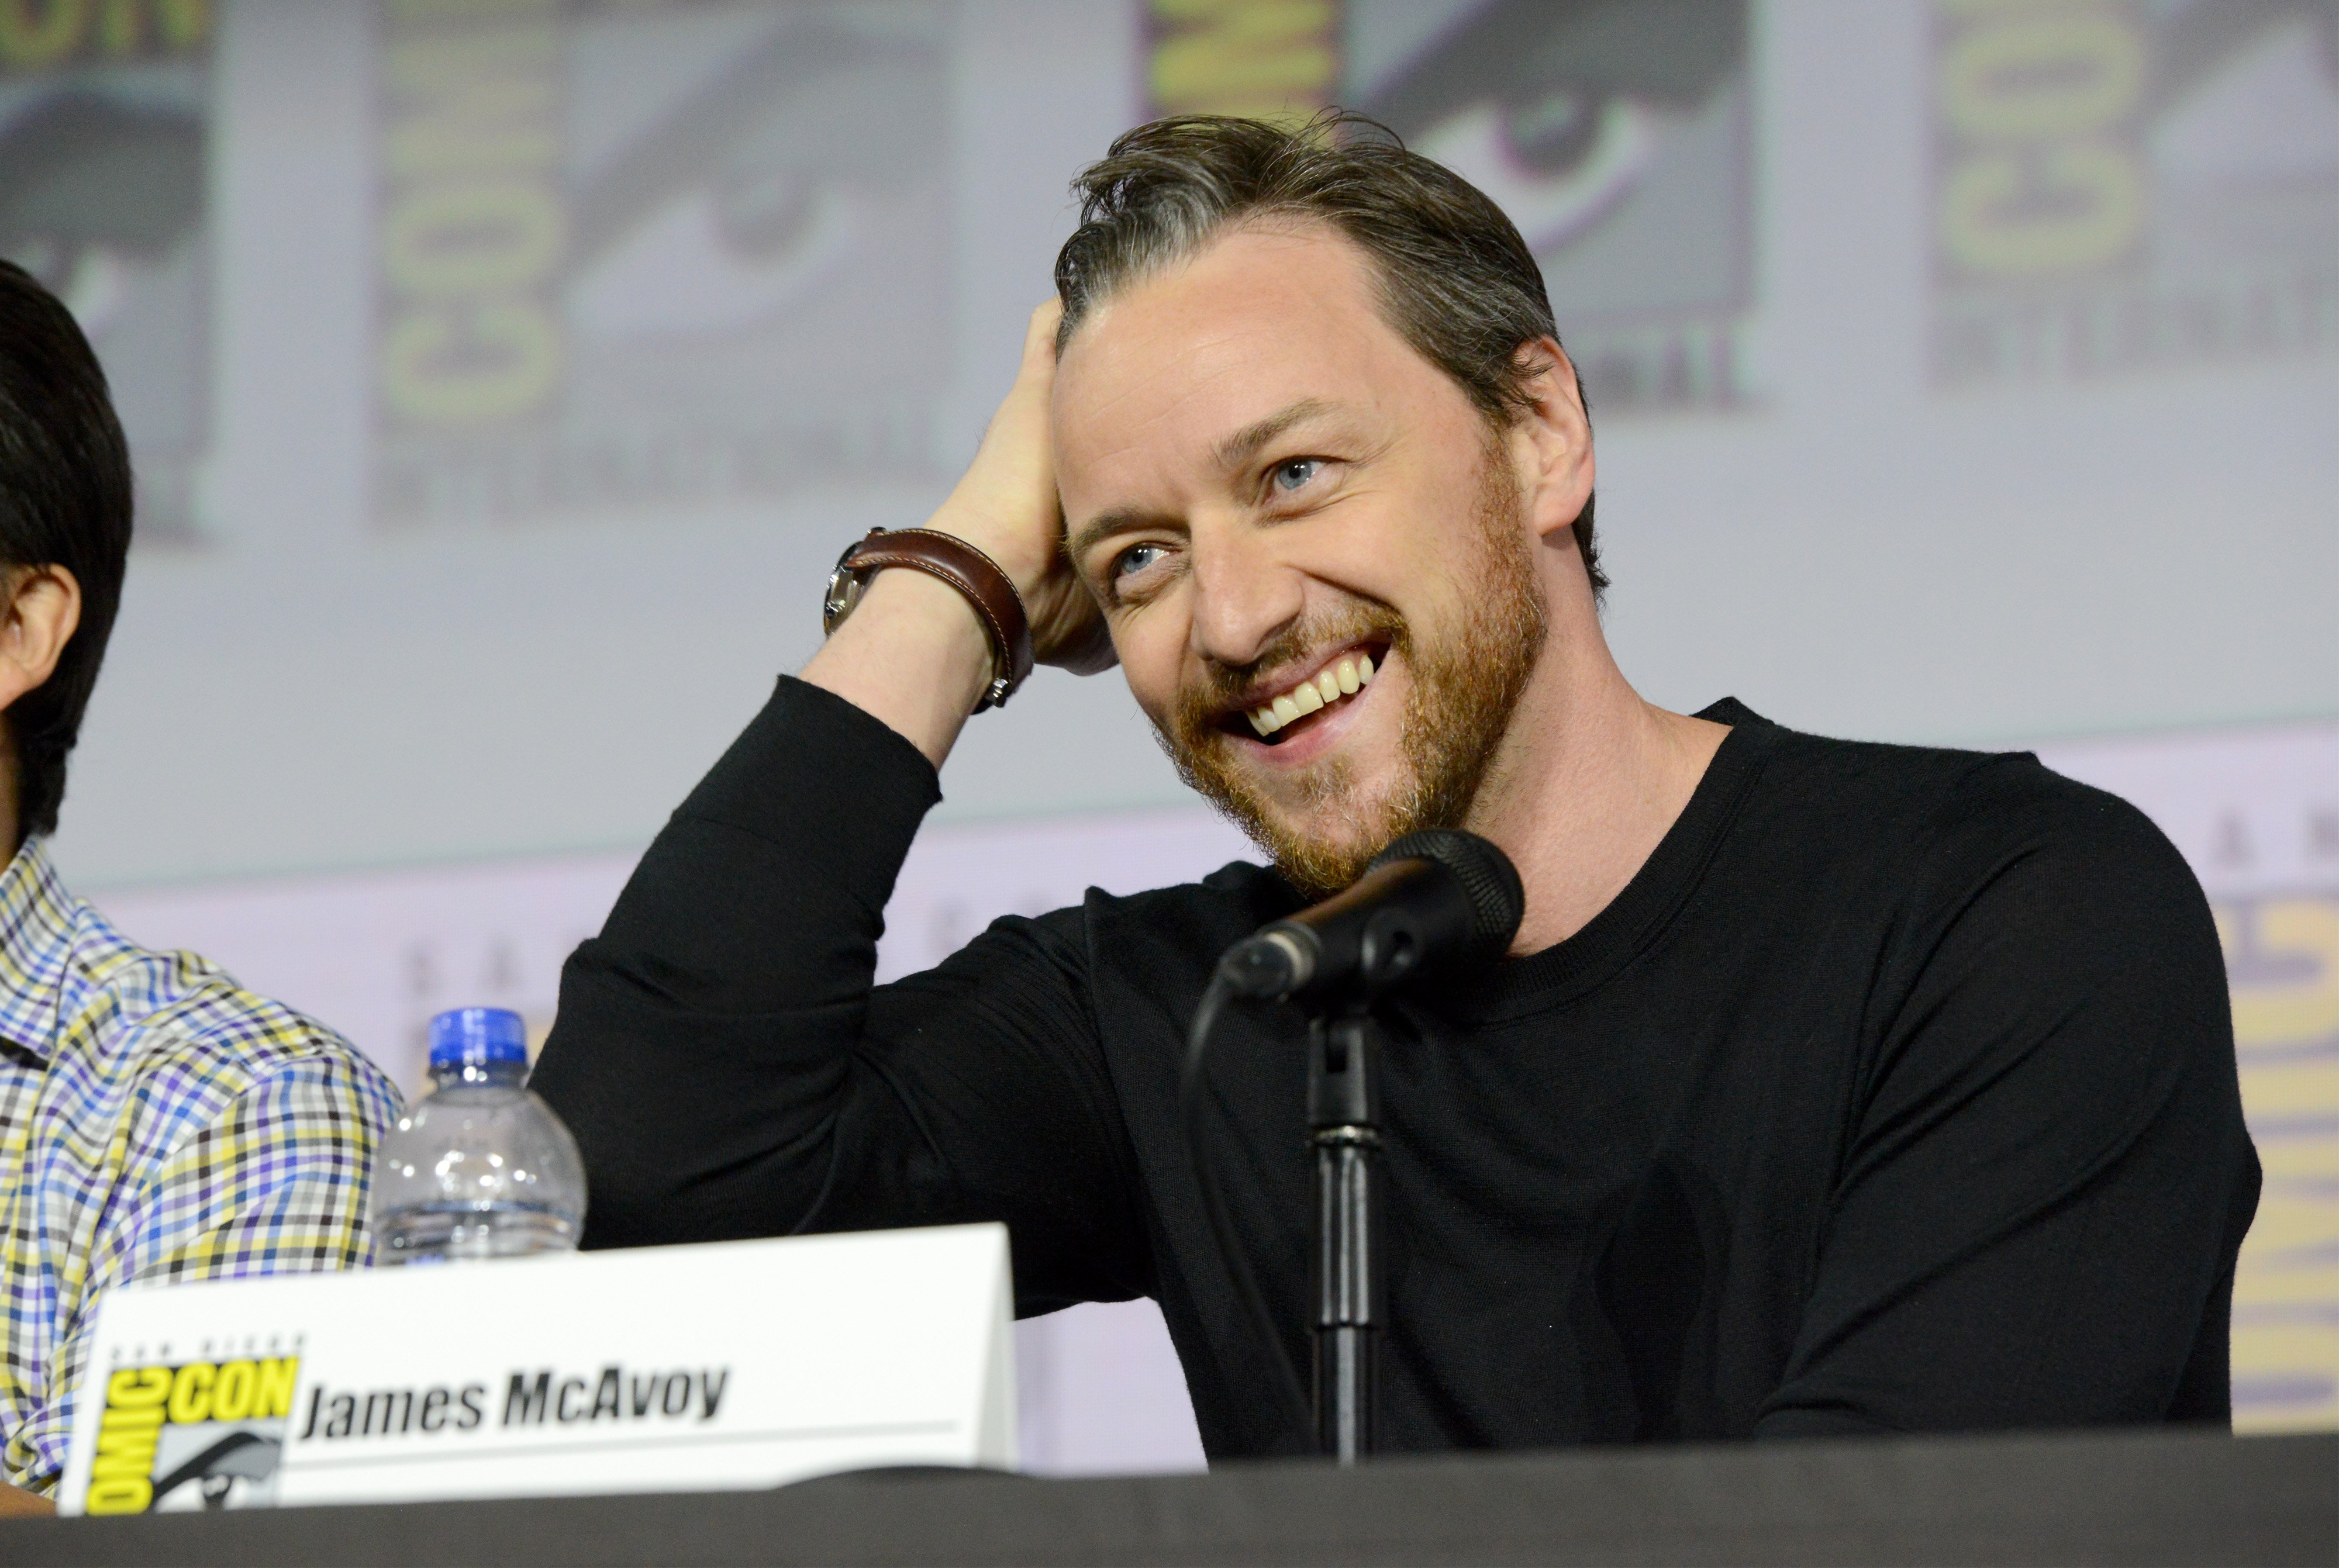 James McAvoy at "His Dark Materials" Comic Con autograph signing on July 18, 2019 in San Diego, California. | Photo: Getty Images